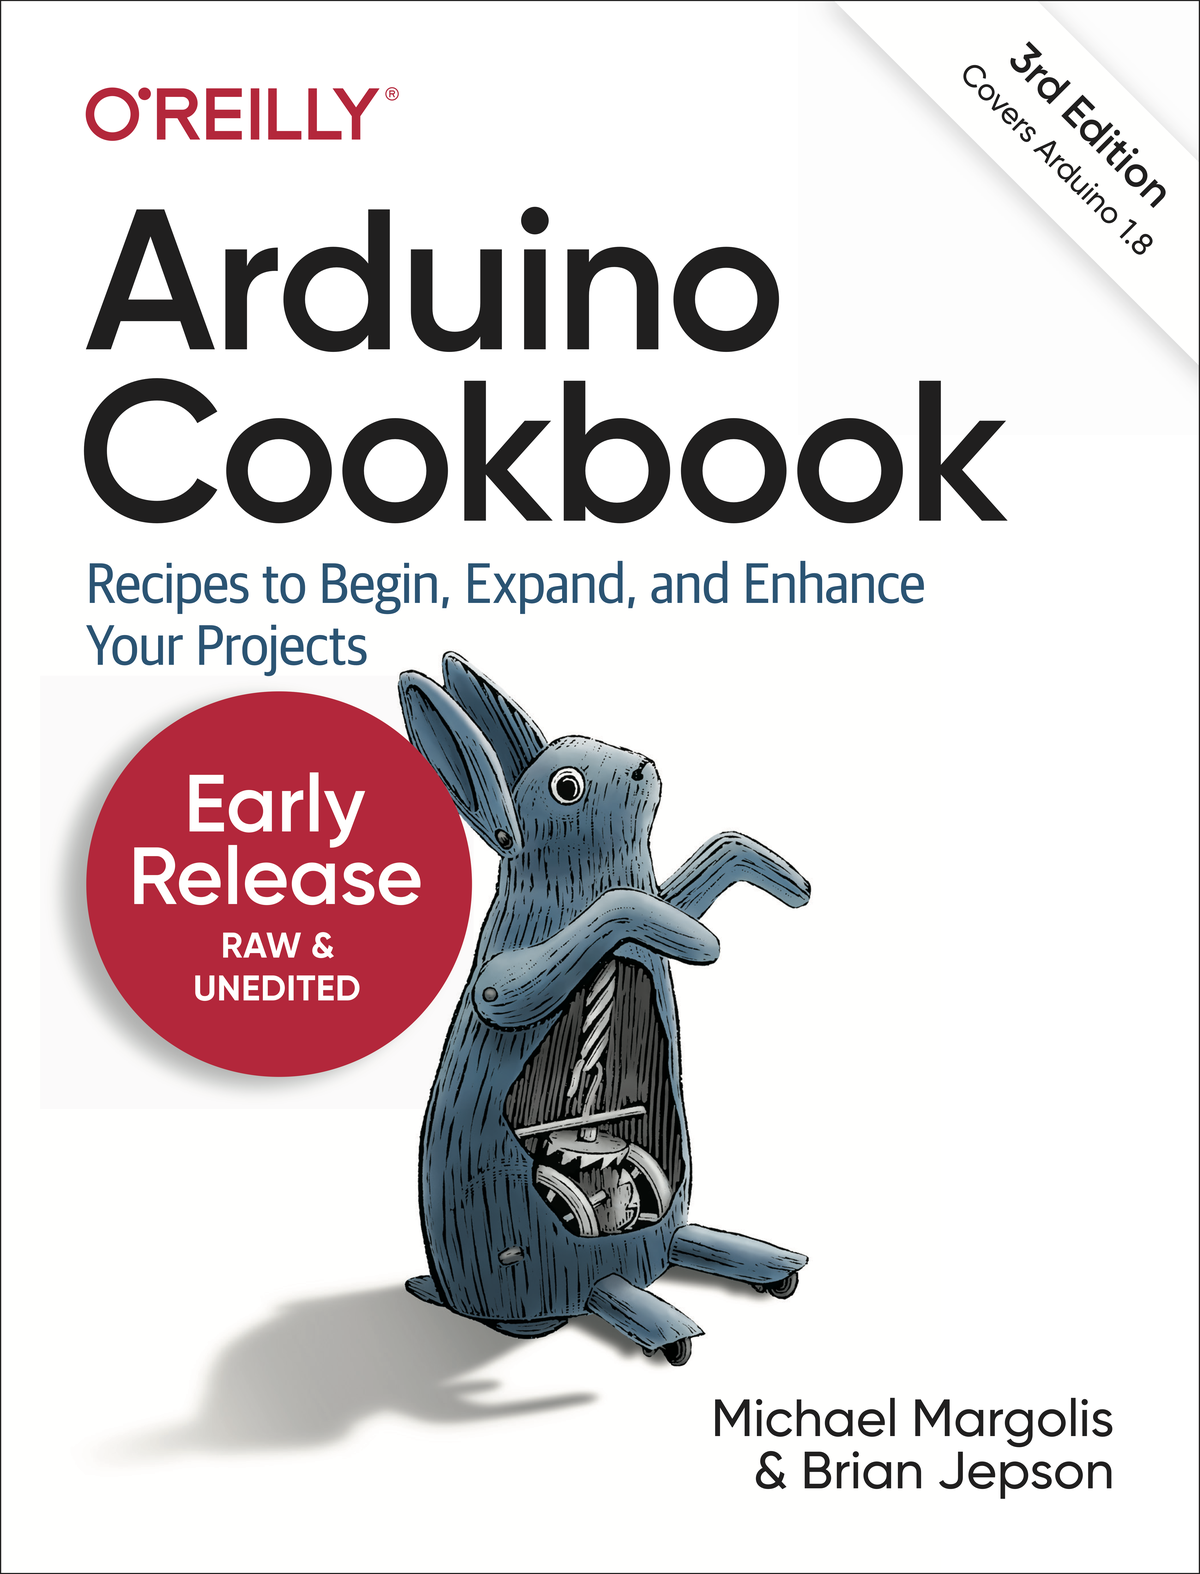 Arduino Cookbook by Michael Margolis and Brian Jepson Copyright 2020 Michael - photo 2